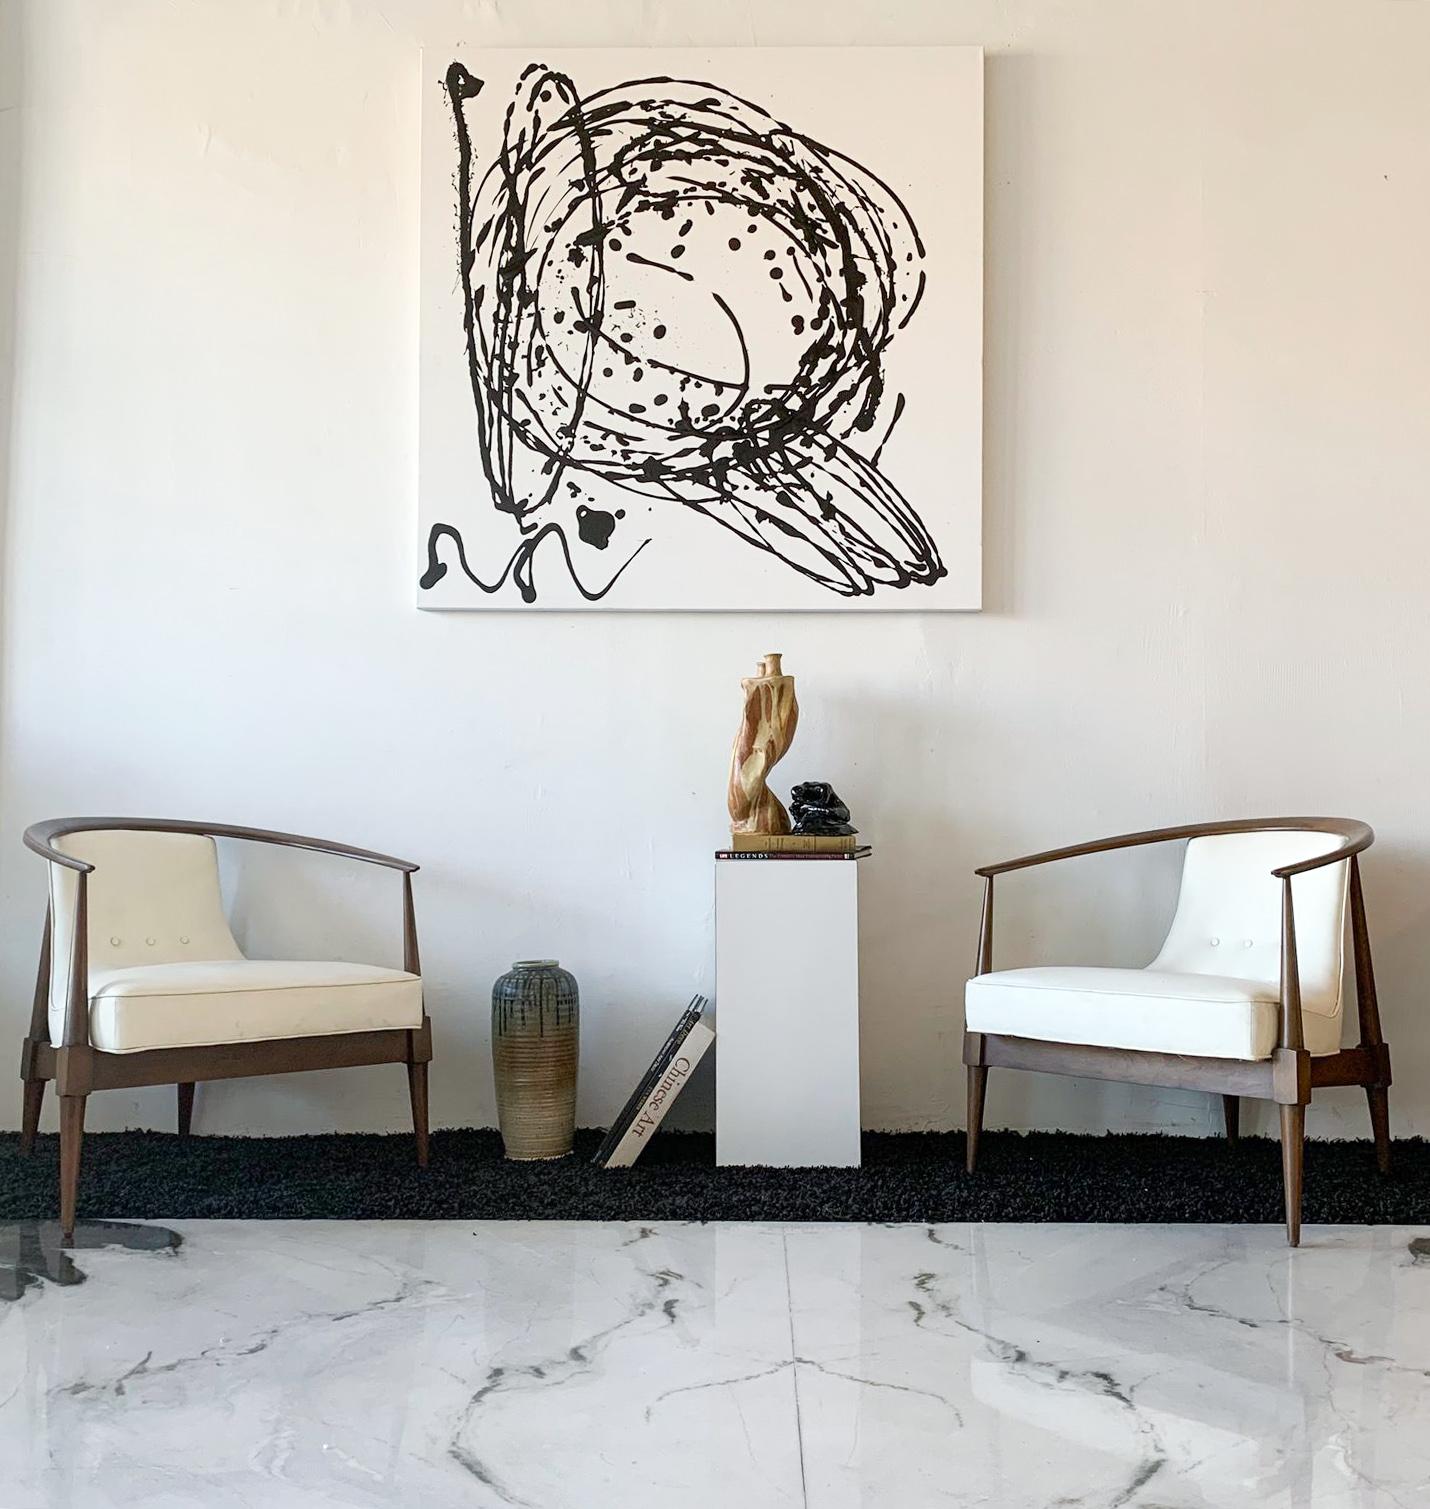 Available right now I have this stunning pair of lounge chairs, a design attributed to Silvio Cavatorta. These stunning Italian lounge chairs are clad in their original white vinyl upholstery and original walnut frames. They are both easy on the